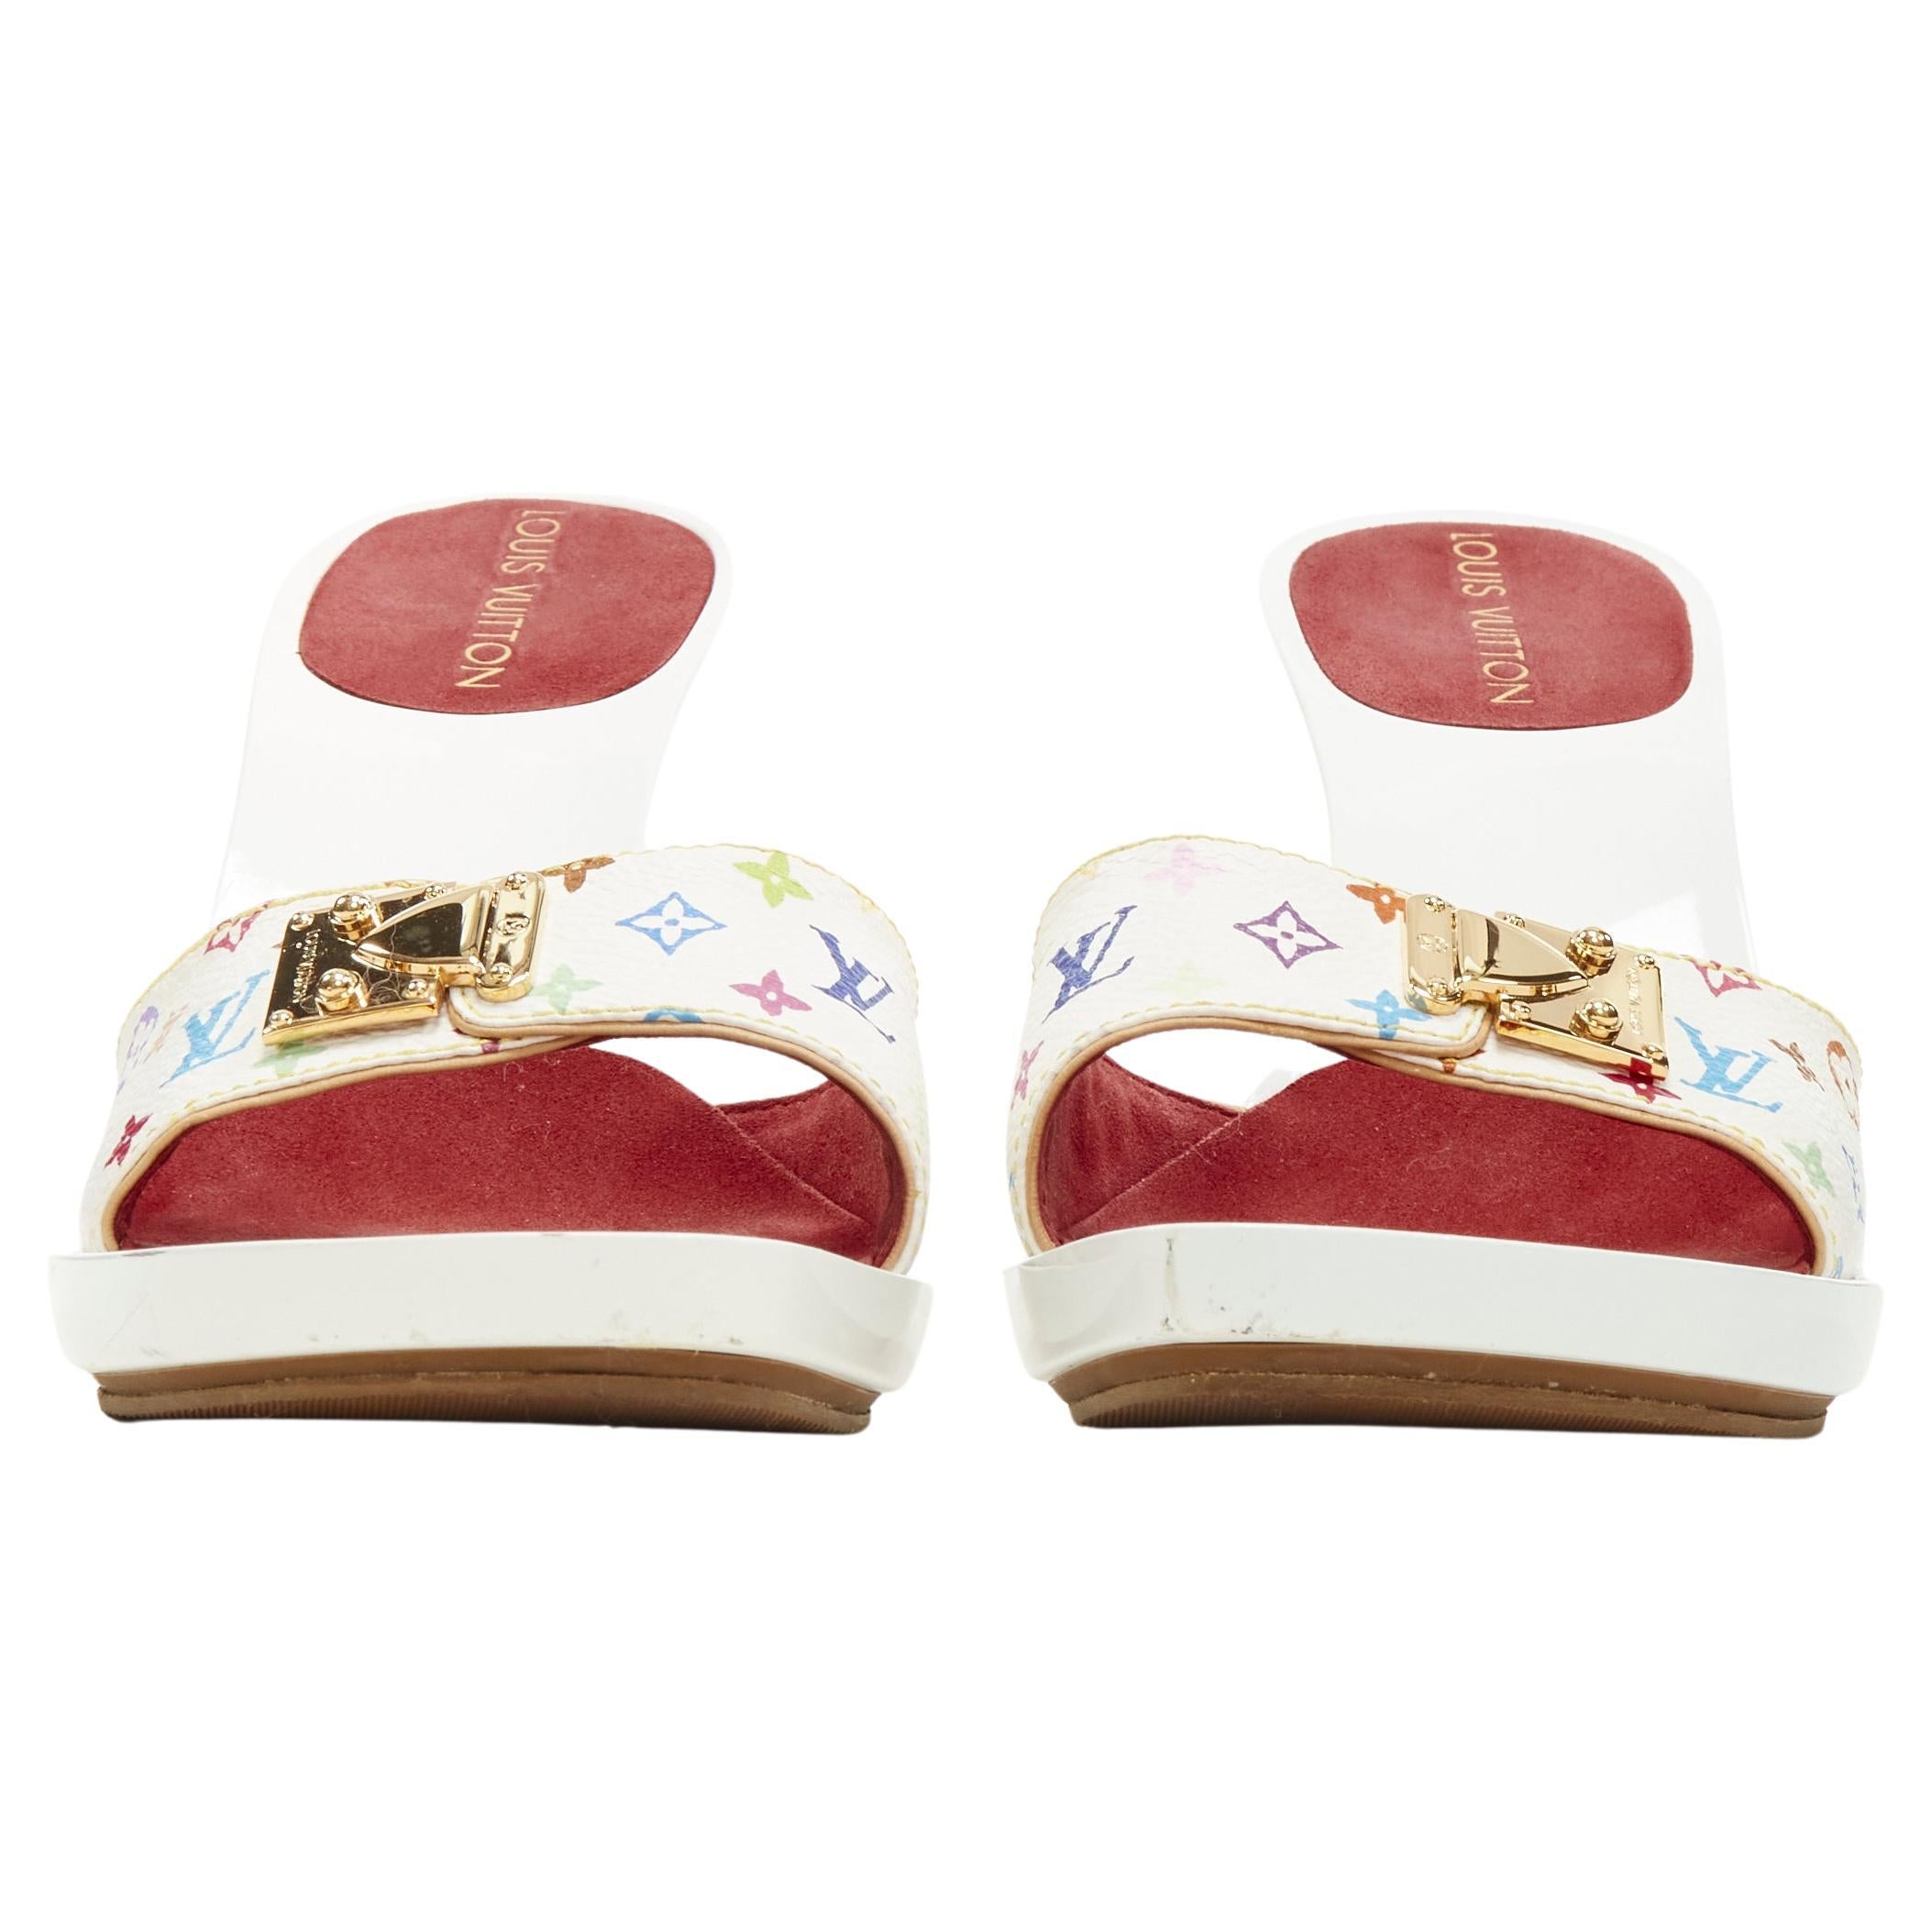 LOUIS VUITTON Y2K white multi monogram gold buckle high heel mule sandal EU37.5
Brand: Louis Vuitton
Material: Canvas
Color: White
Pattern: Logomania
Extra Detail: Gold-tone buckle.

CONDITION:
Condition: Very good, this item was pre-owned and is in